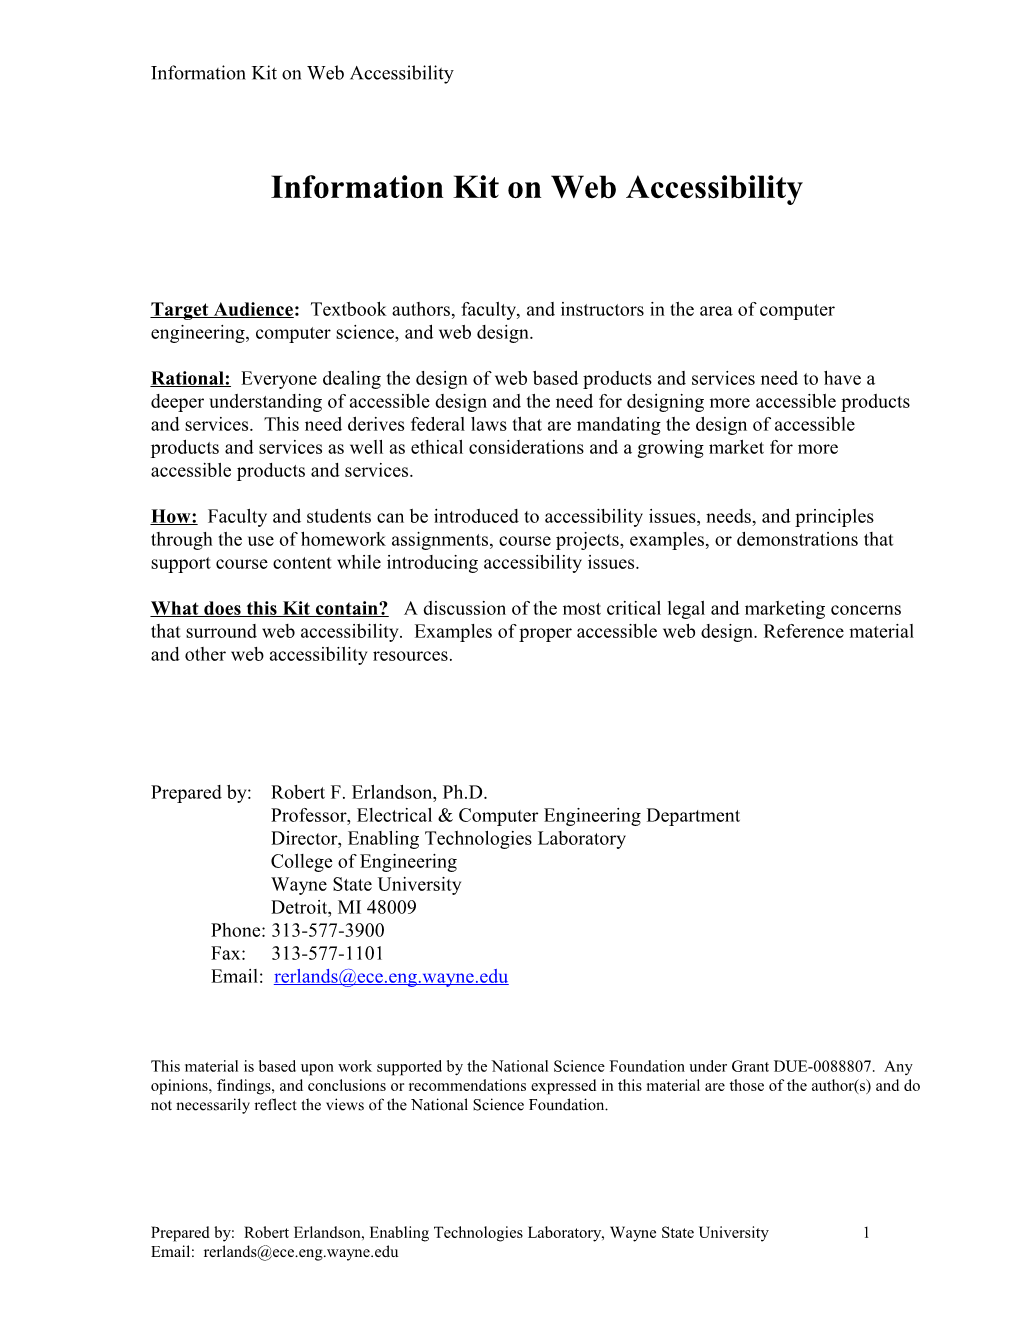 Information Kit on Web Accessibility